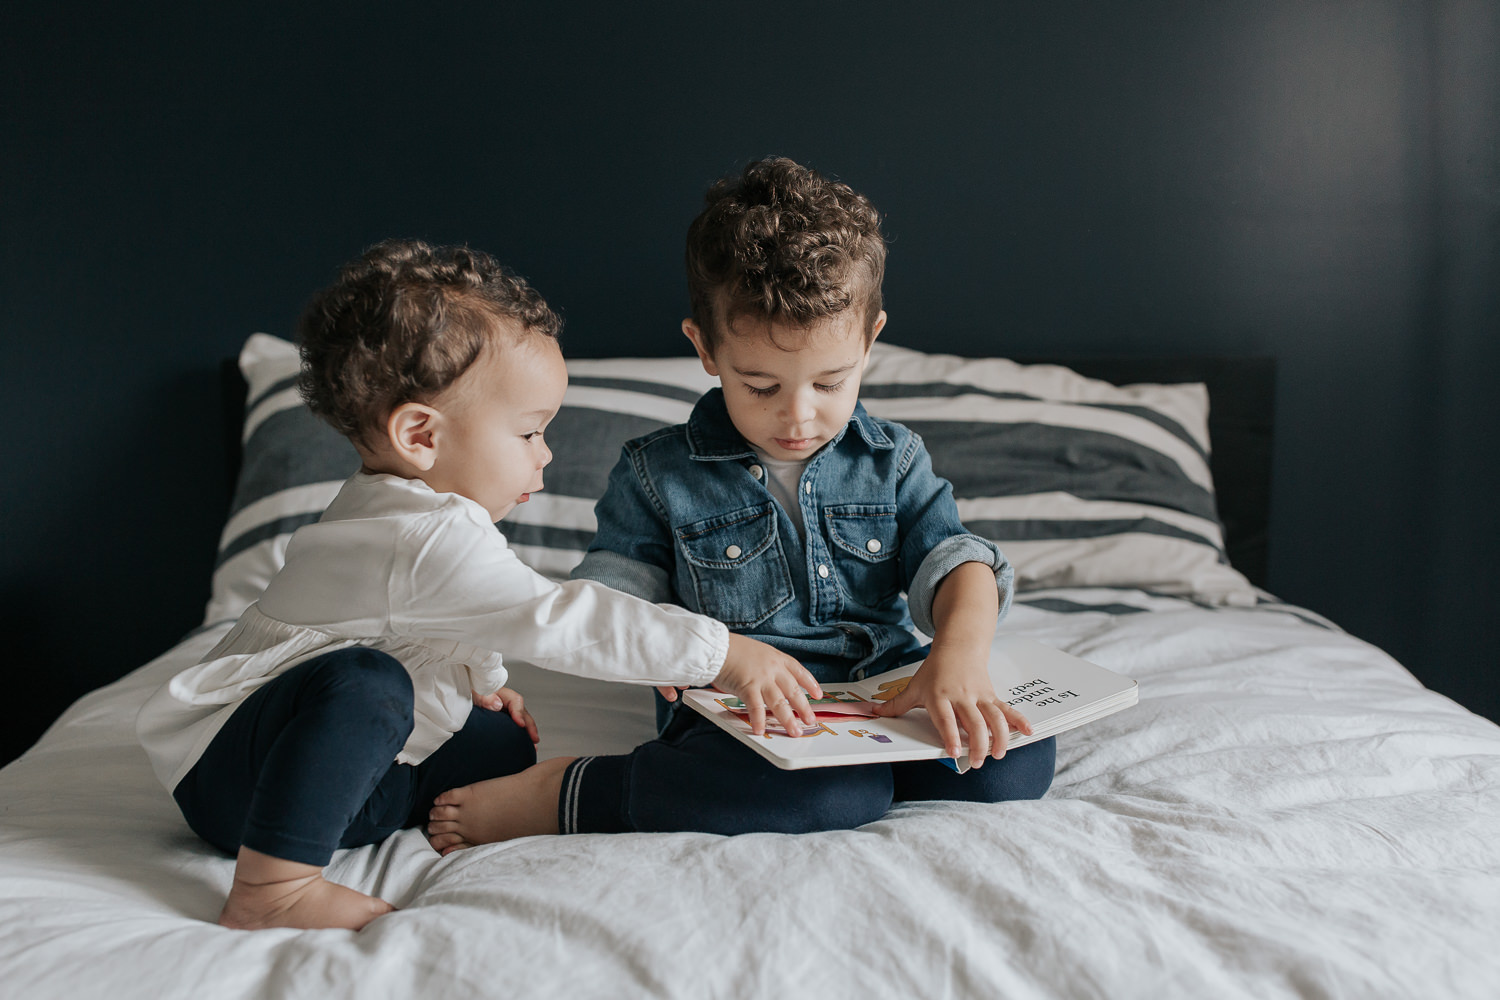 2 year old toddler boy with dark curly hair wearing chambray shirt sitting on his bed reading book, 1 year old baby sister sitting next to him, reaching for the page - Markham Lifestyle Photos